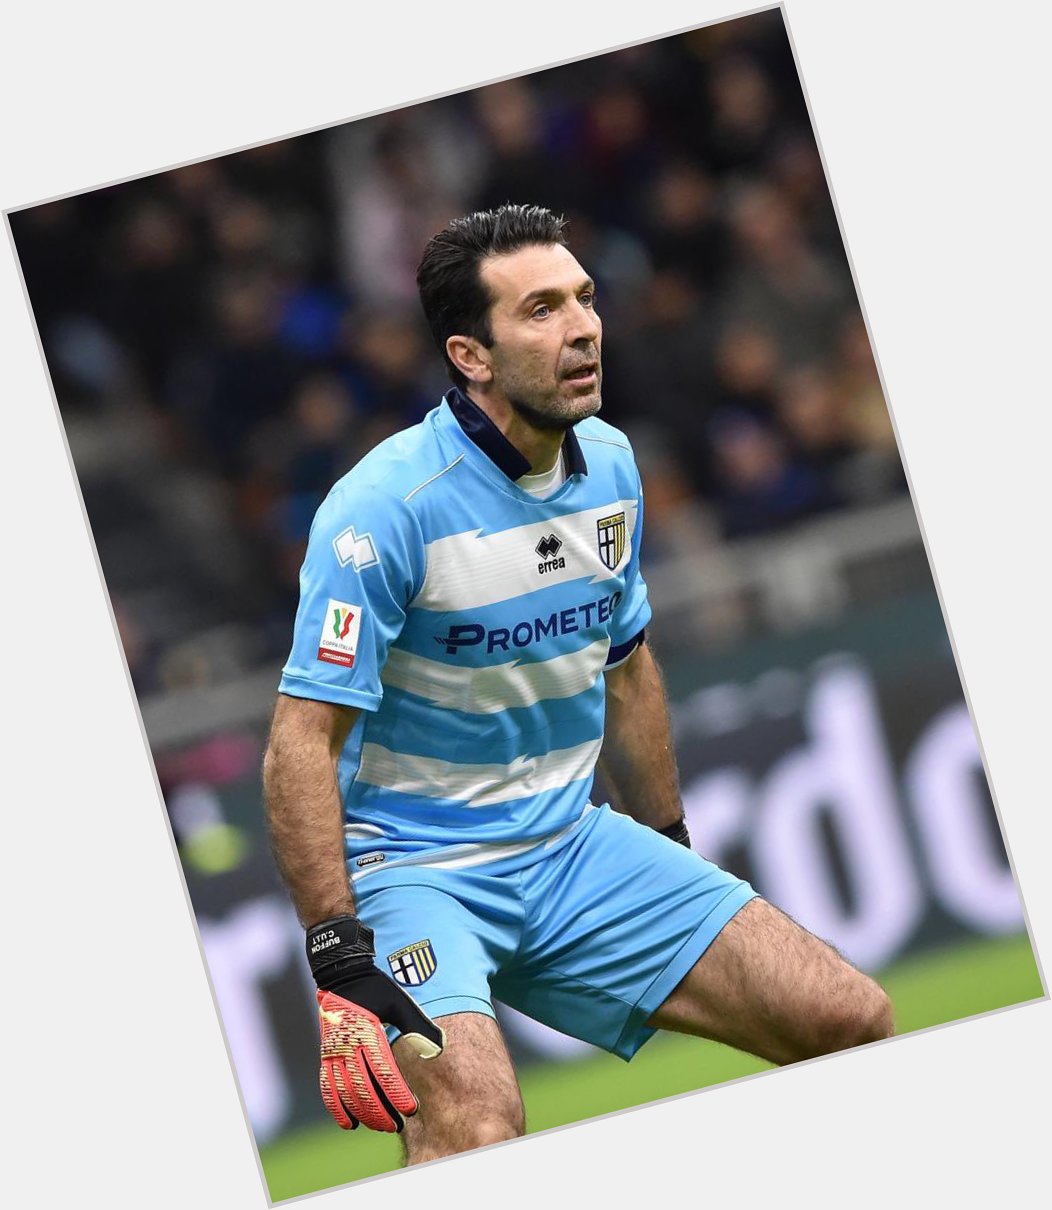 Happy Birthday to Gianluigi Buffon, who turns 4  5  today! One of the greatest goalkeepers of all time  